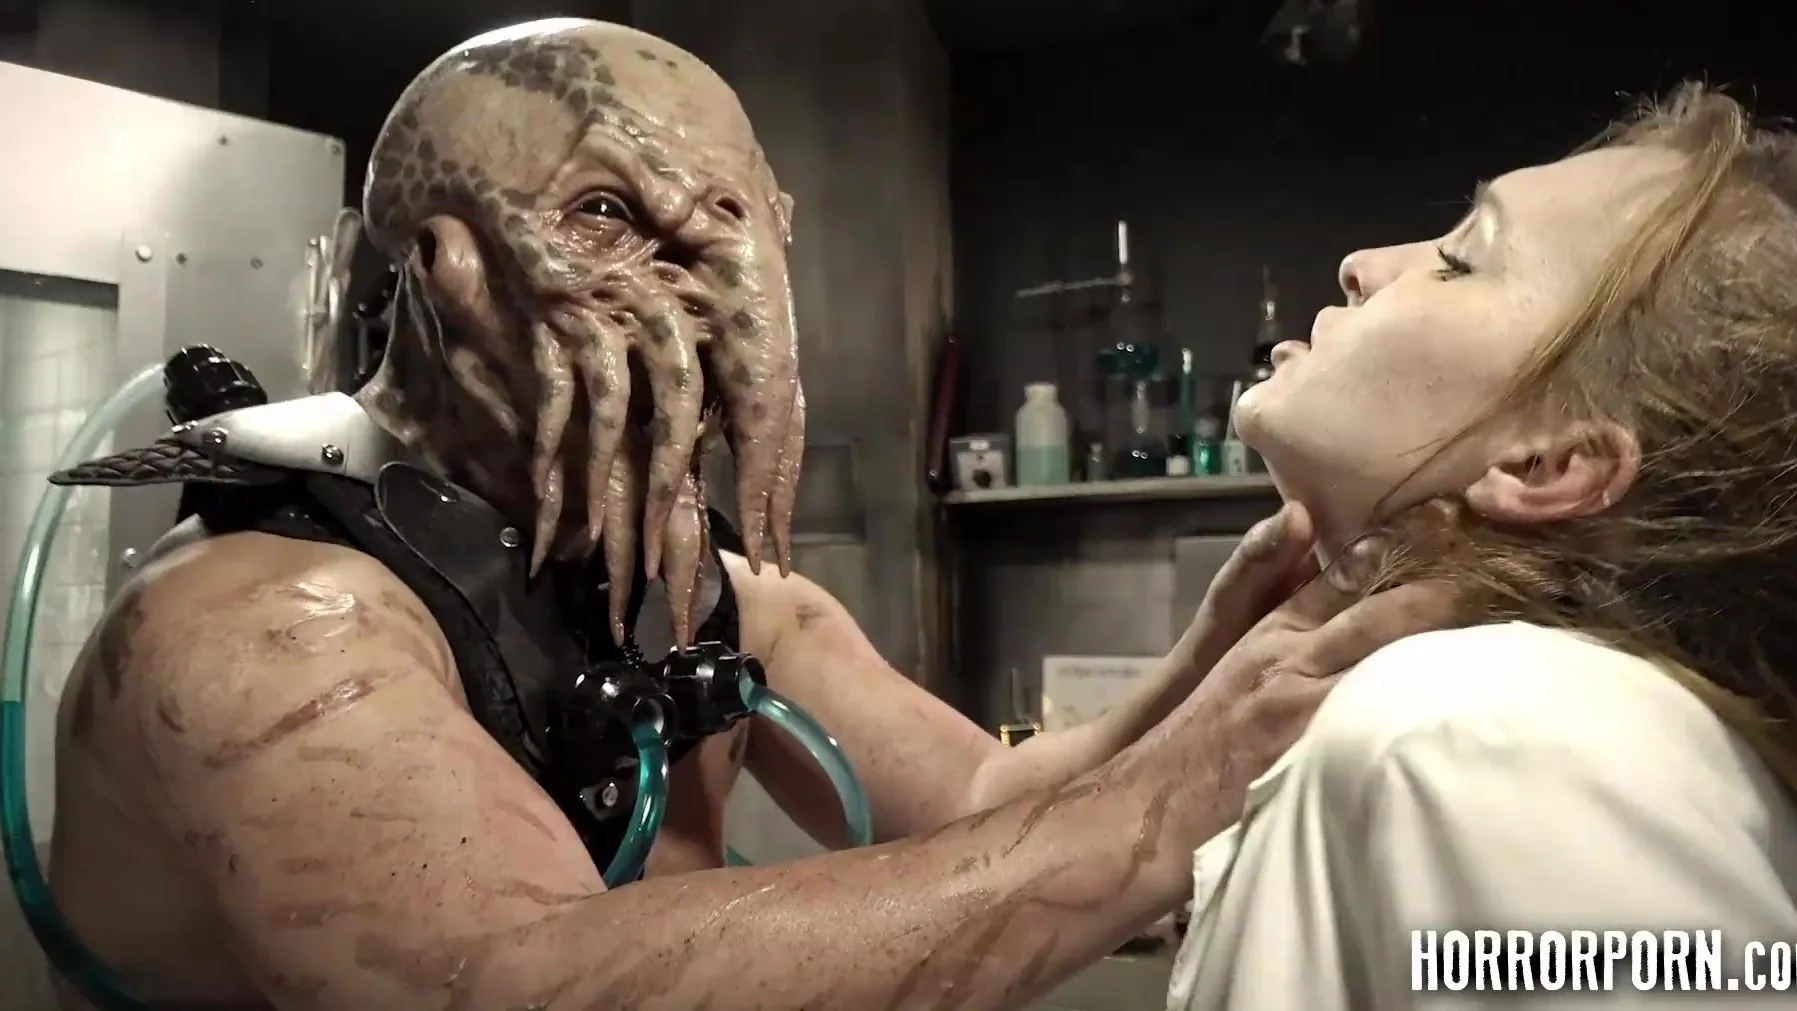 Body Horror Porn - Horror Porn Movie: Resurrected Cthulhu With Erected Dick Fucks Beautiful  Seductive Doctor Bell Claire